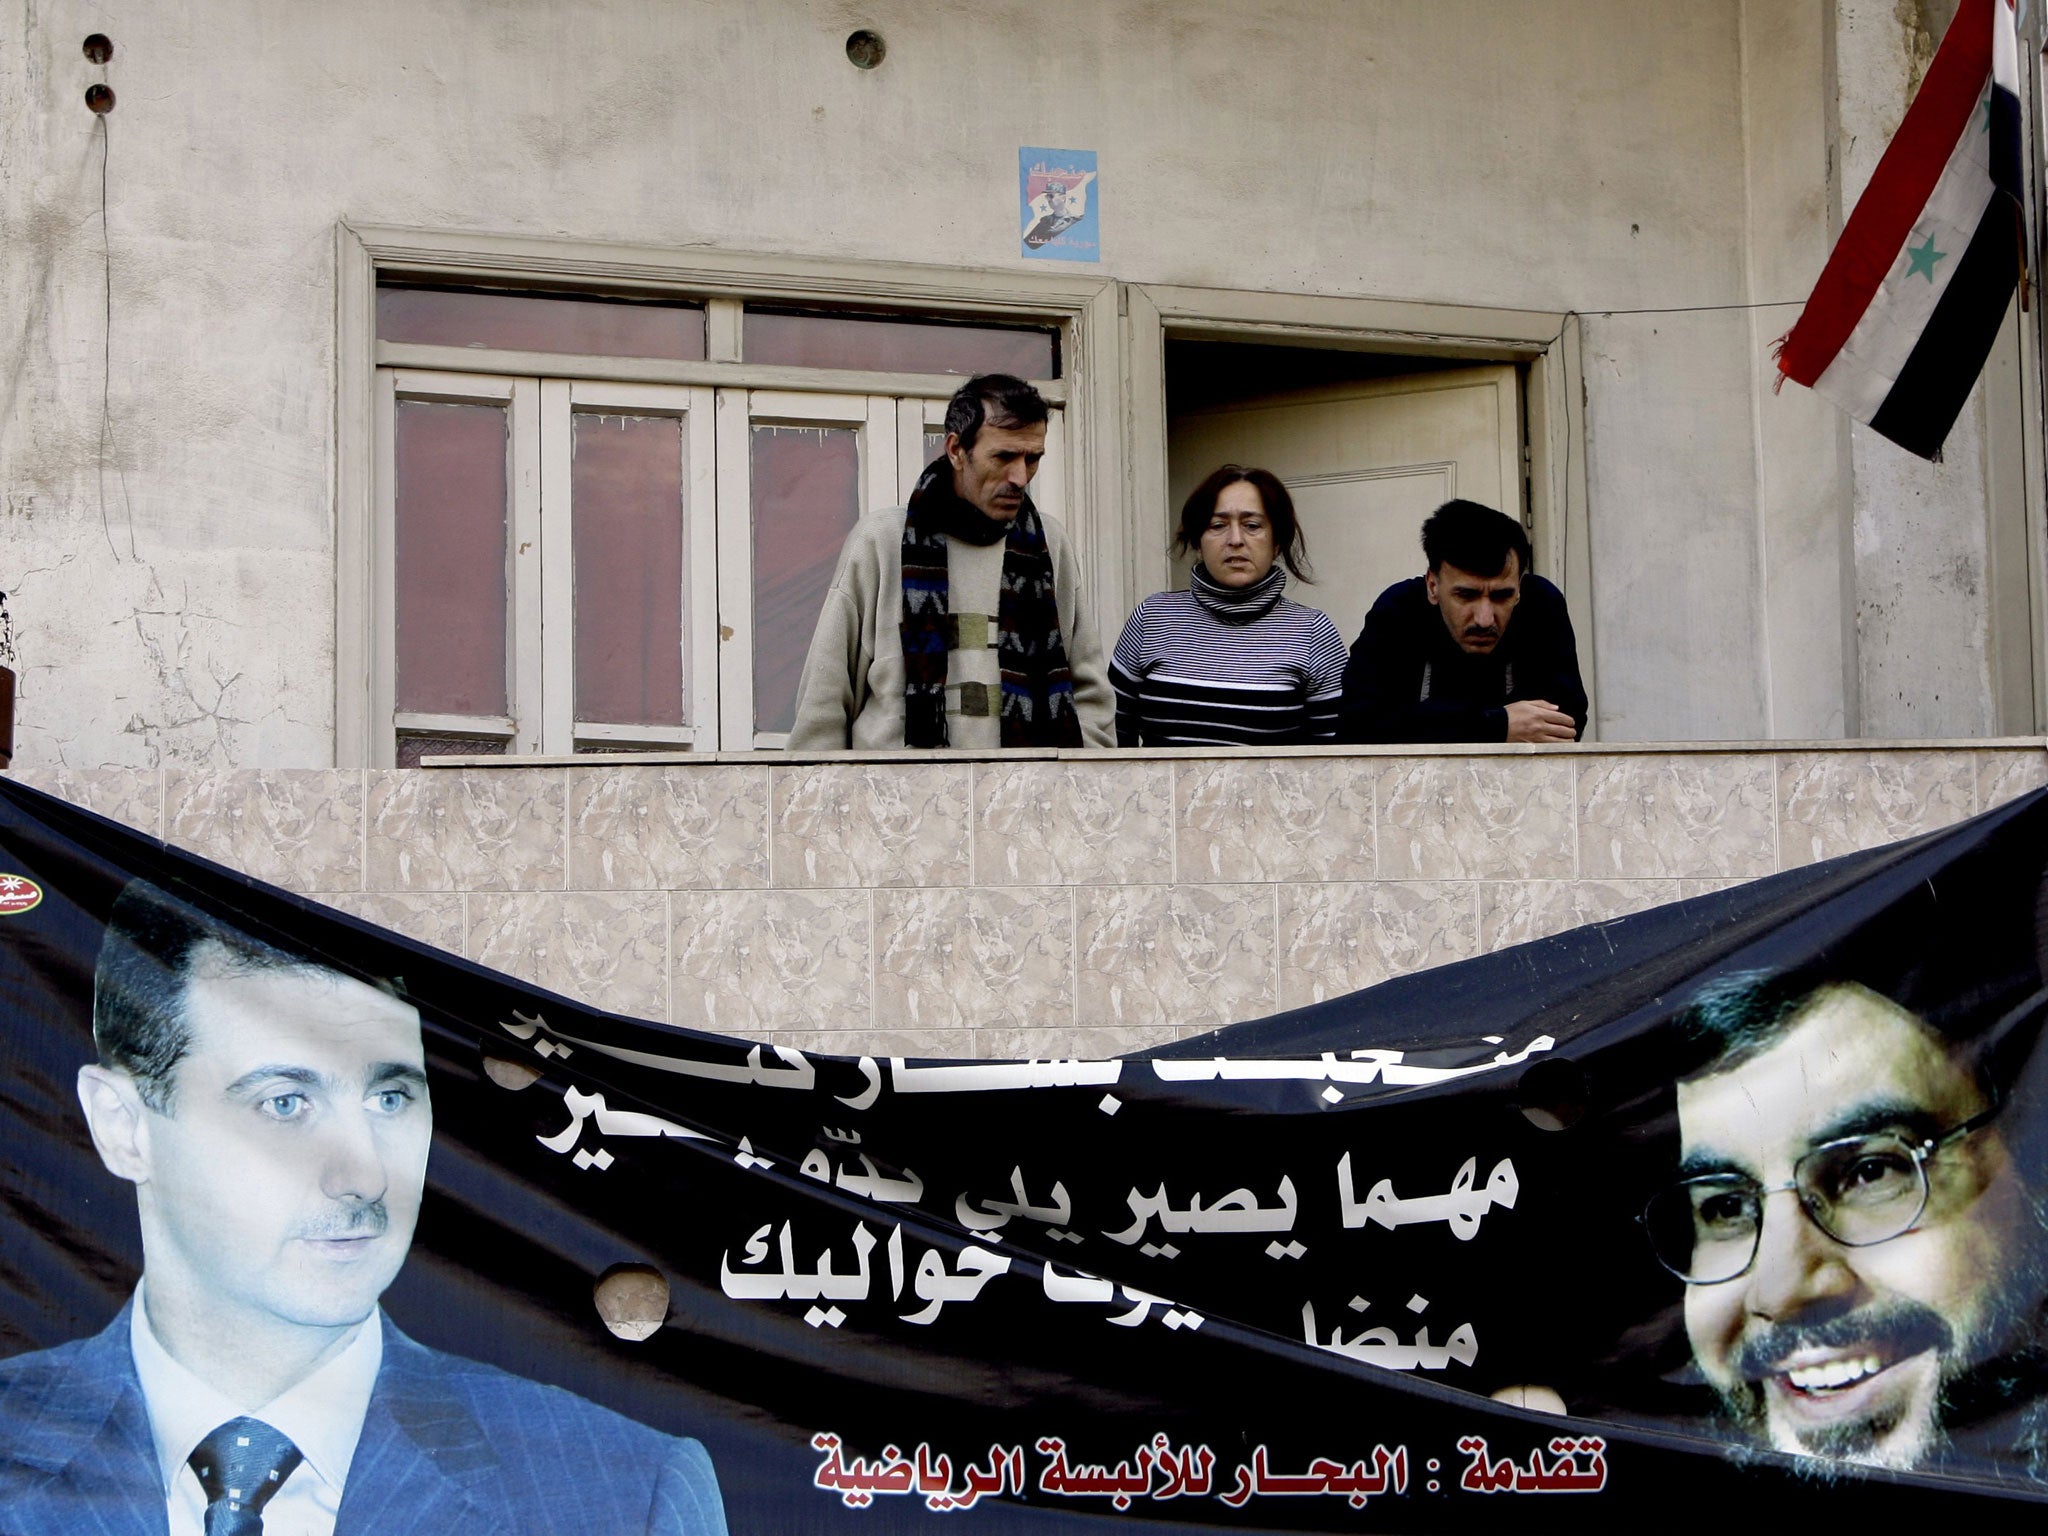 Syrians stand above a poster of Syrian President Bashar al-Assad (L) and Lebanese Hezbollah Leader Hassan Nasrallah (R) hanging on the wall of a building in the Alawite neighbourhood of Nuzhah in the western city of Homs, 162 kms north of Damascus, on January 11, 2012.